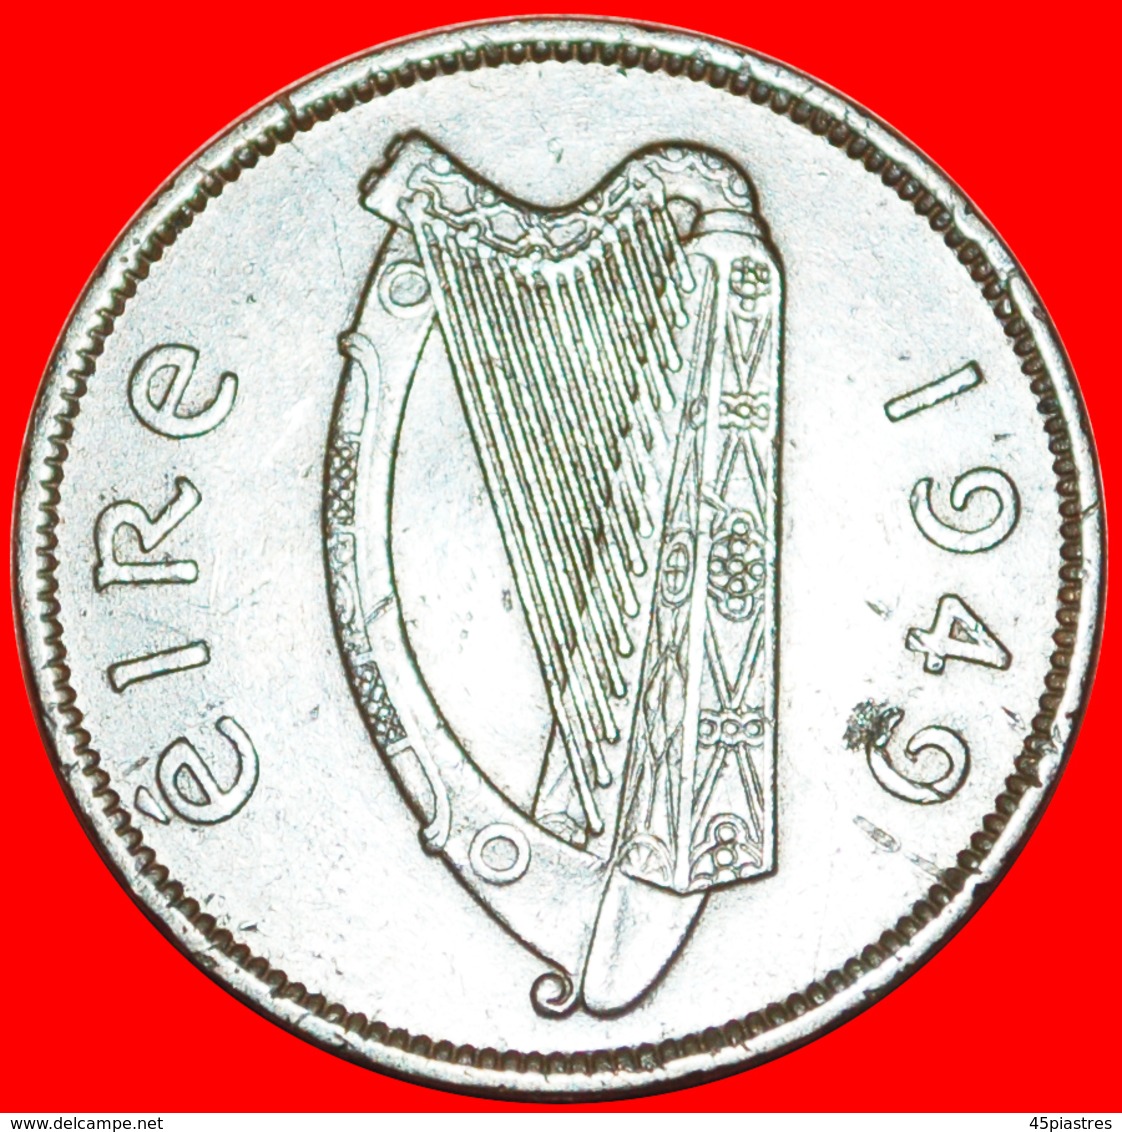 √ PIG AND PIGLETS: IRELAND ★ 1/2 PENNY 1949! LOW START ★ NO RESERVE! - Irlande